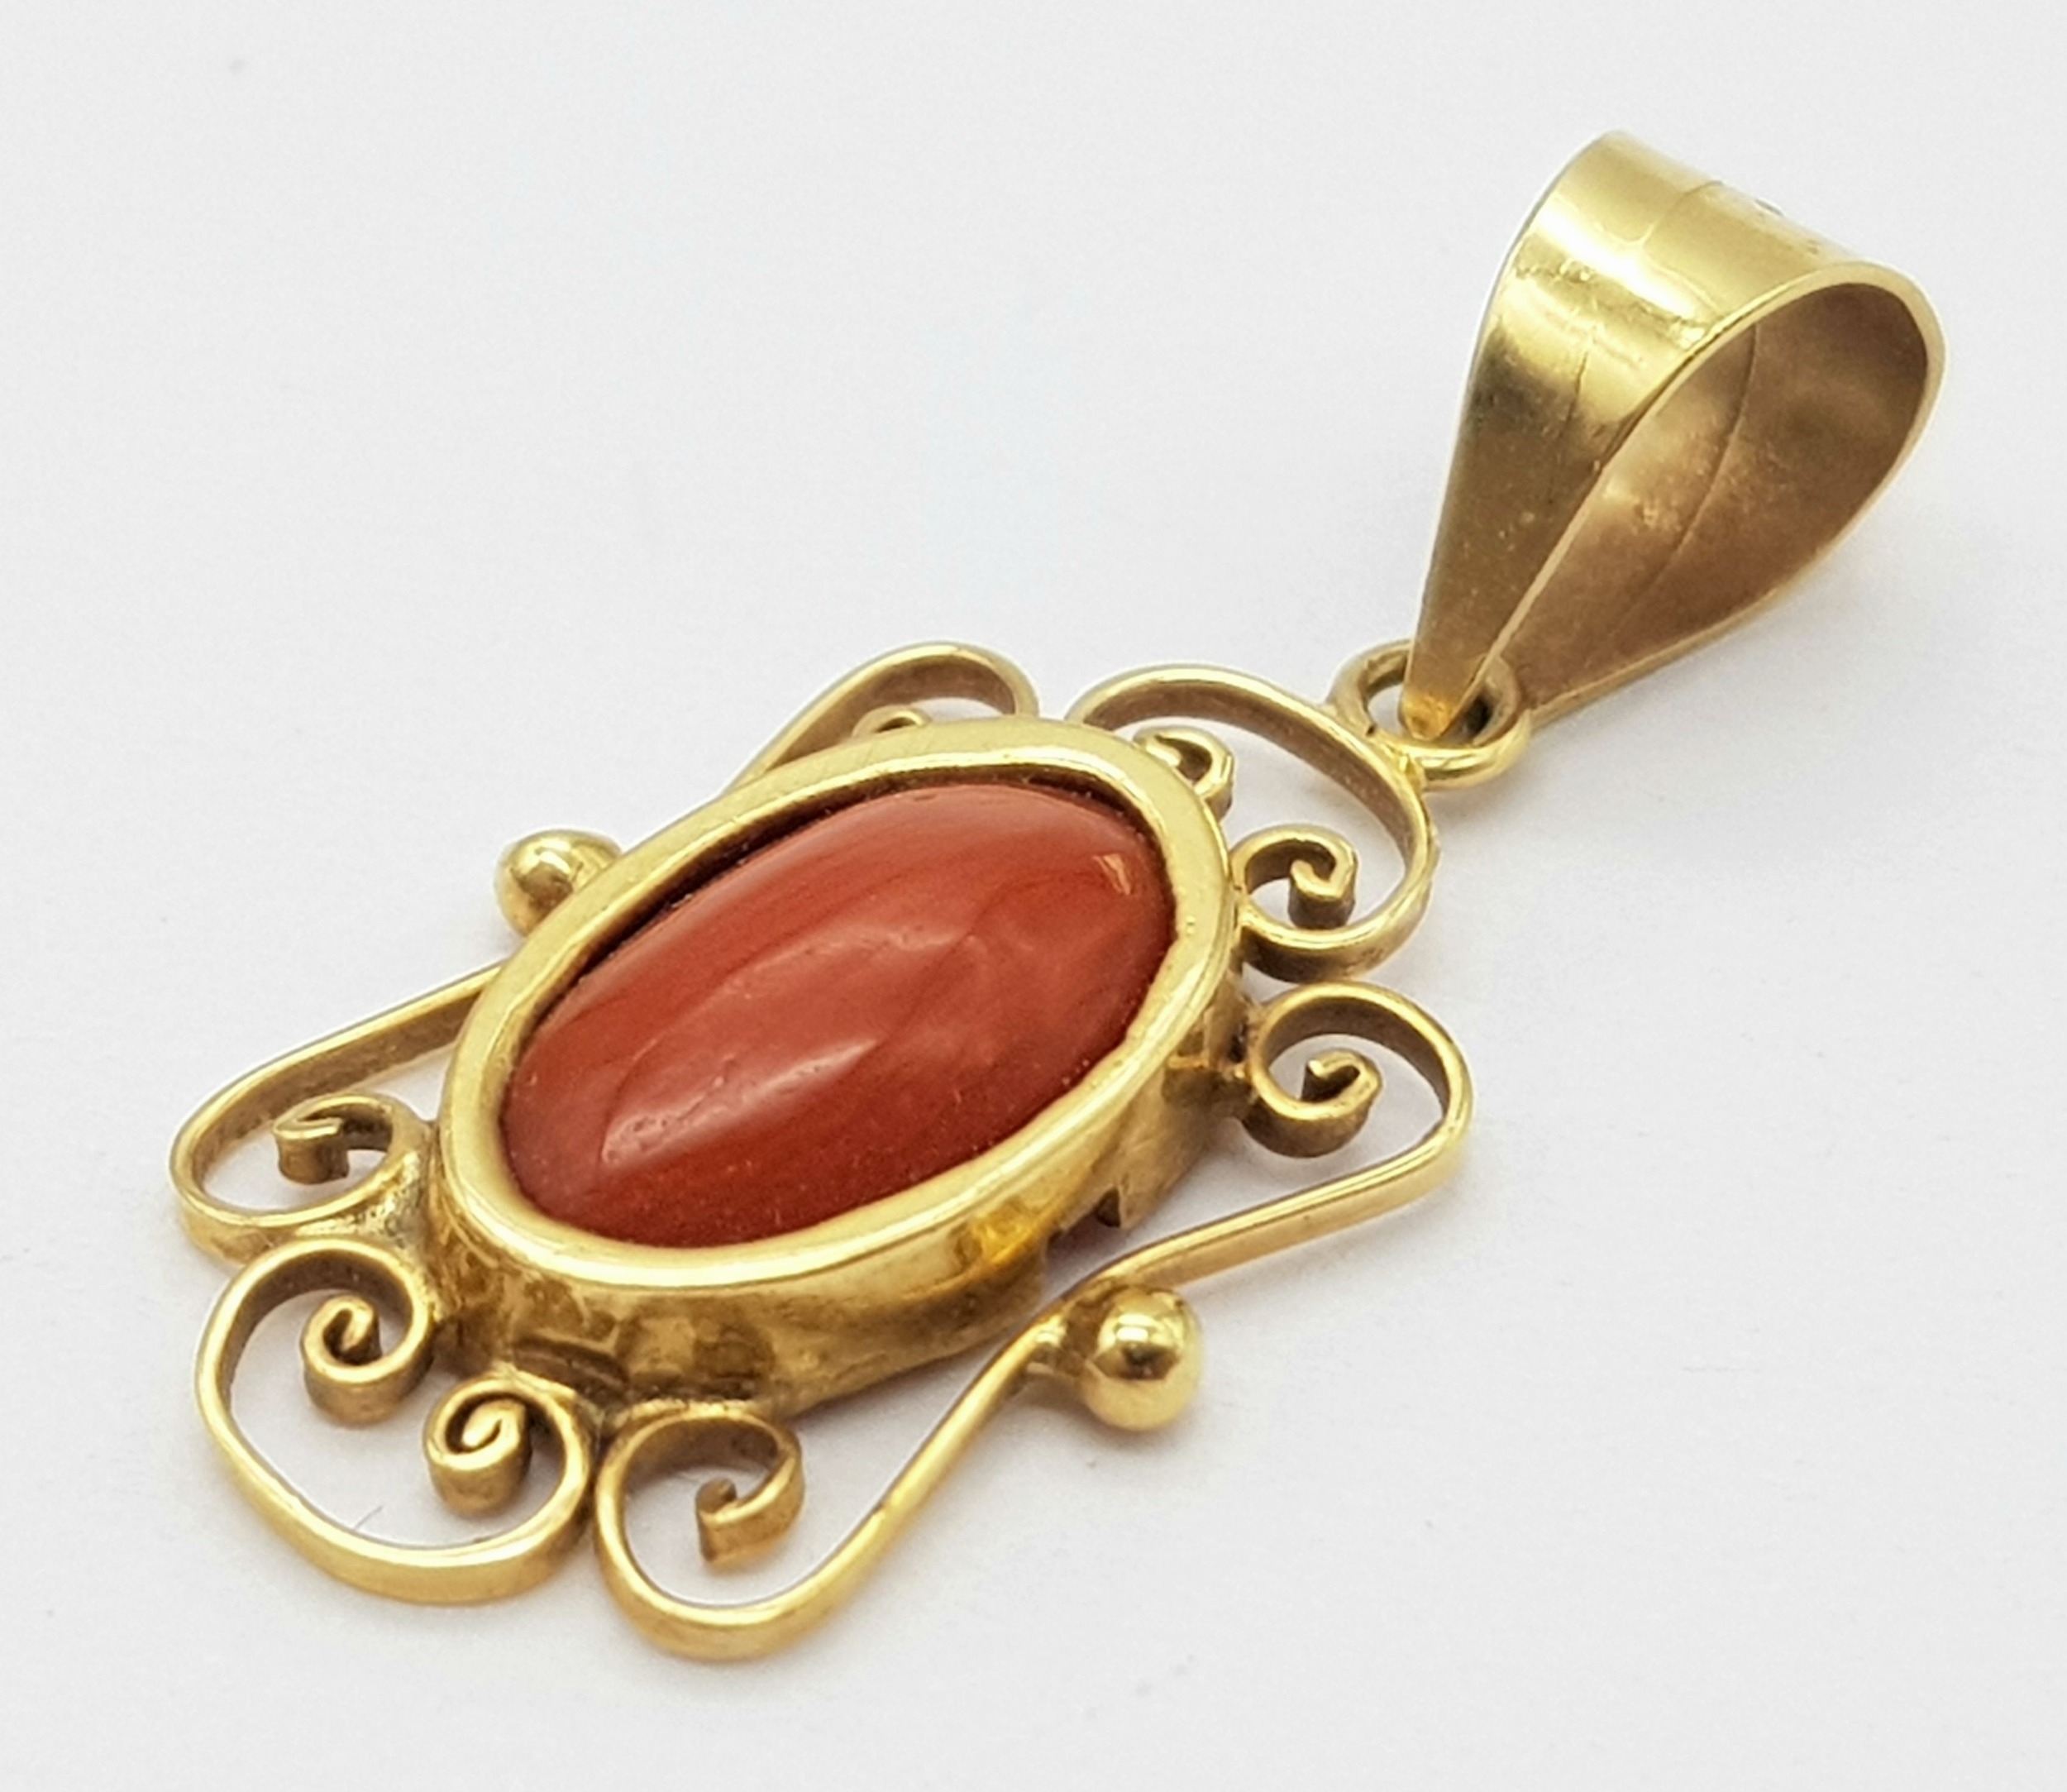 A 18ct Yellow Gold (tested as) Carnelian Fancy Pendant, 10mmx6mm carnelian, 1.4g weight, approx 26mm